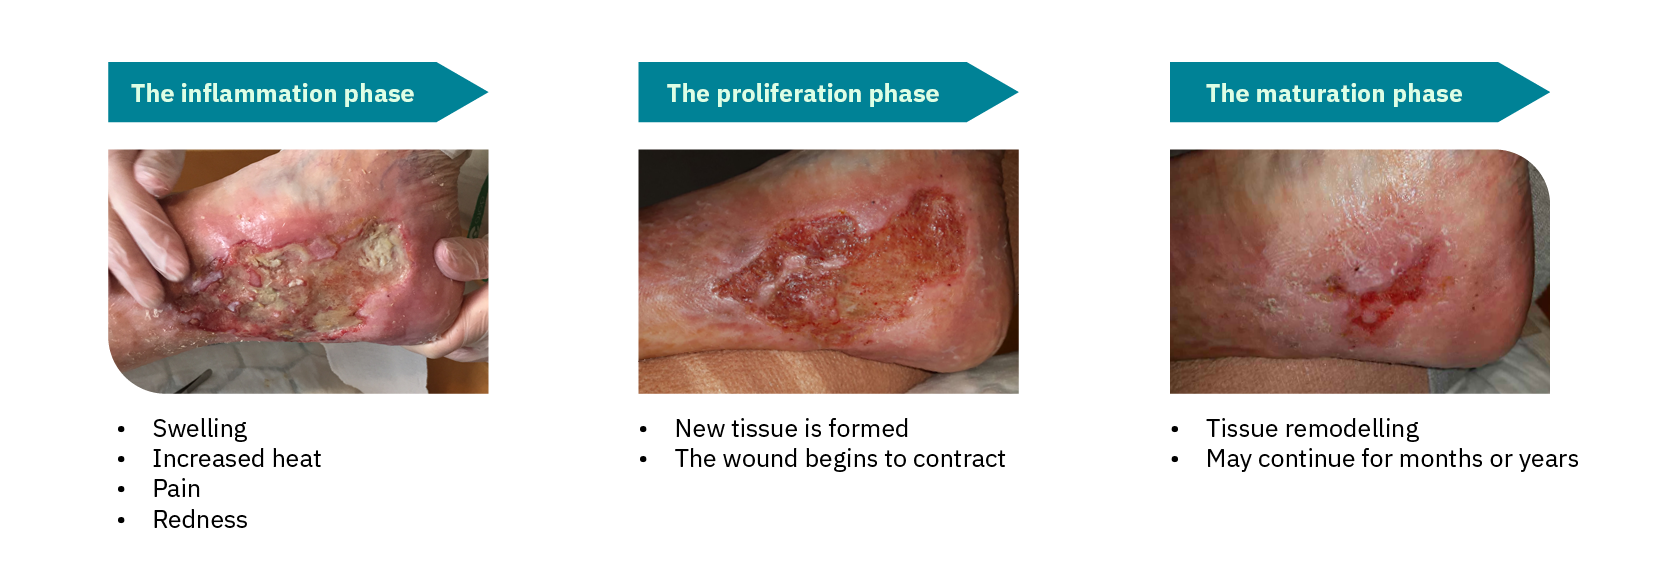 phaeses in wound healing process for leg ulcer